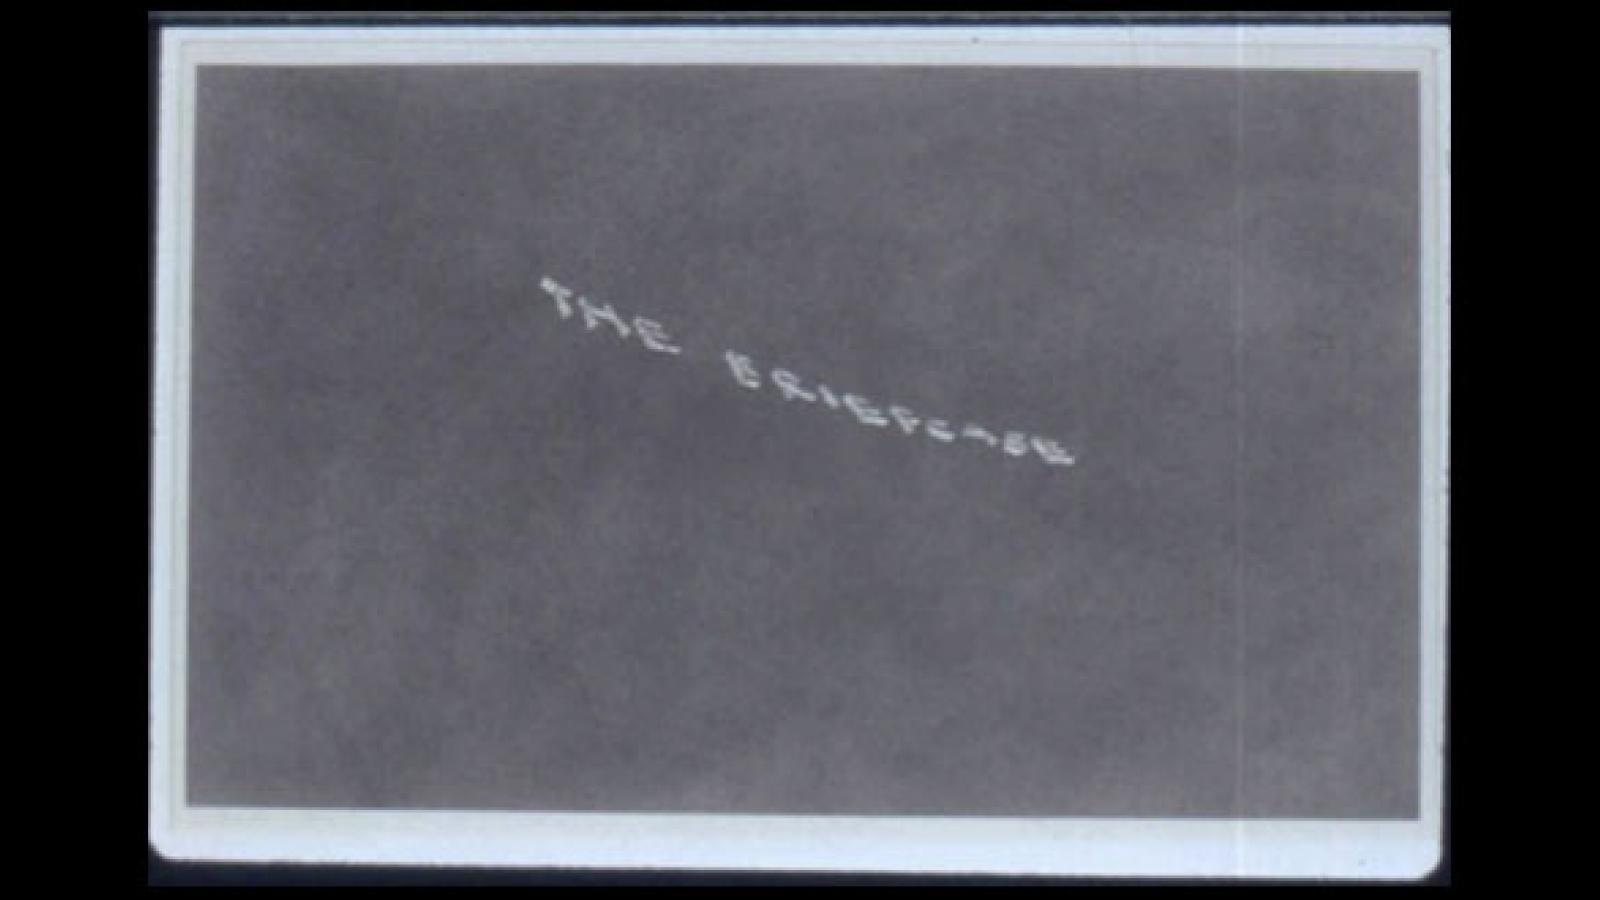 Ed Ruscha, The Briefcase, 1973, gunpowder on paper, 13 x 21 1/2 inches (33 x 54.6 cm) The Museum of contemporary Art, Los Angeles, partial and promised gift of Blake Byrne. Image Copy-write Ed Ruscha.